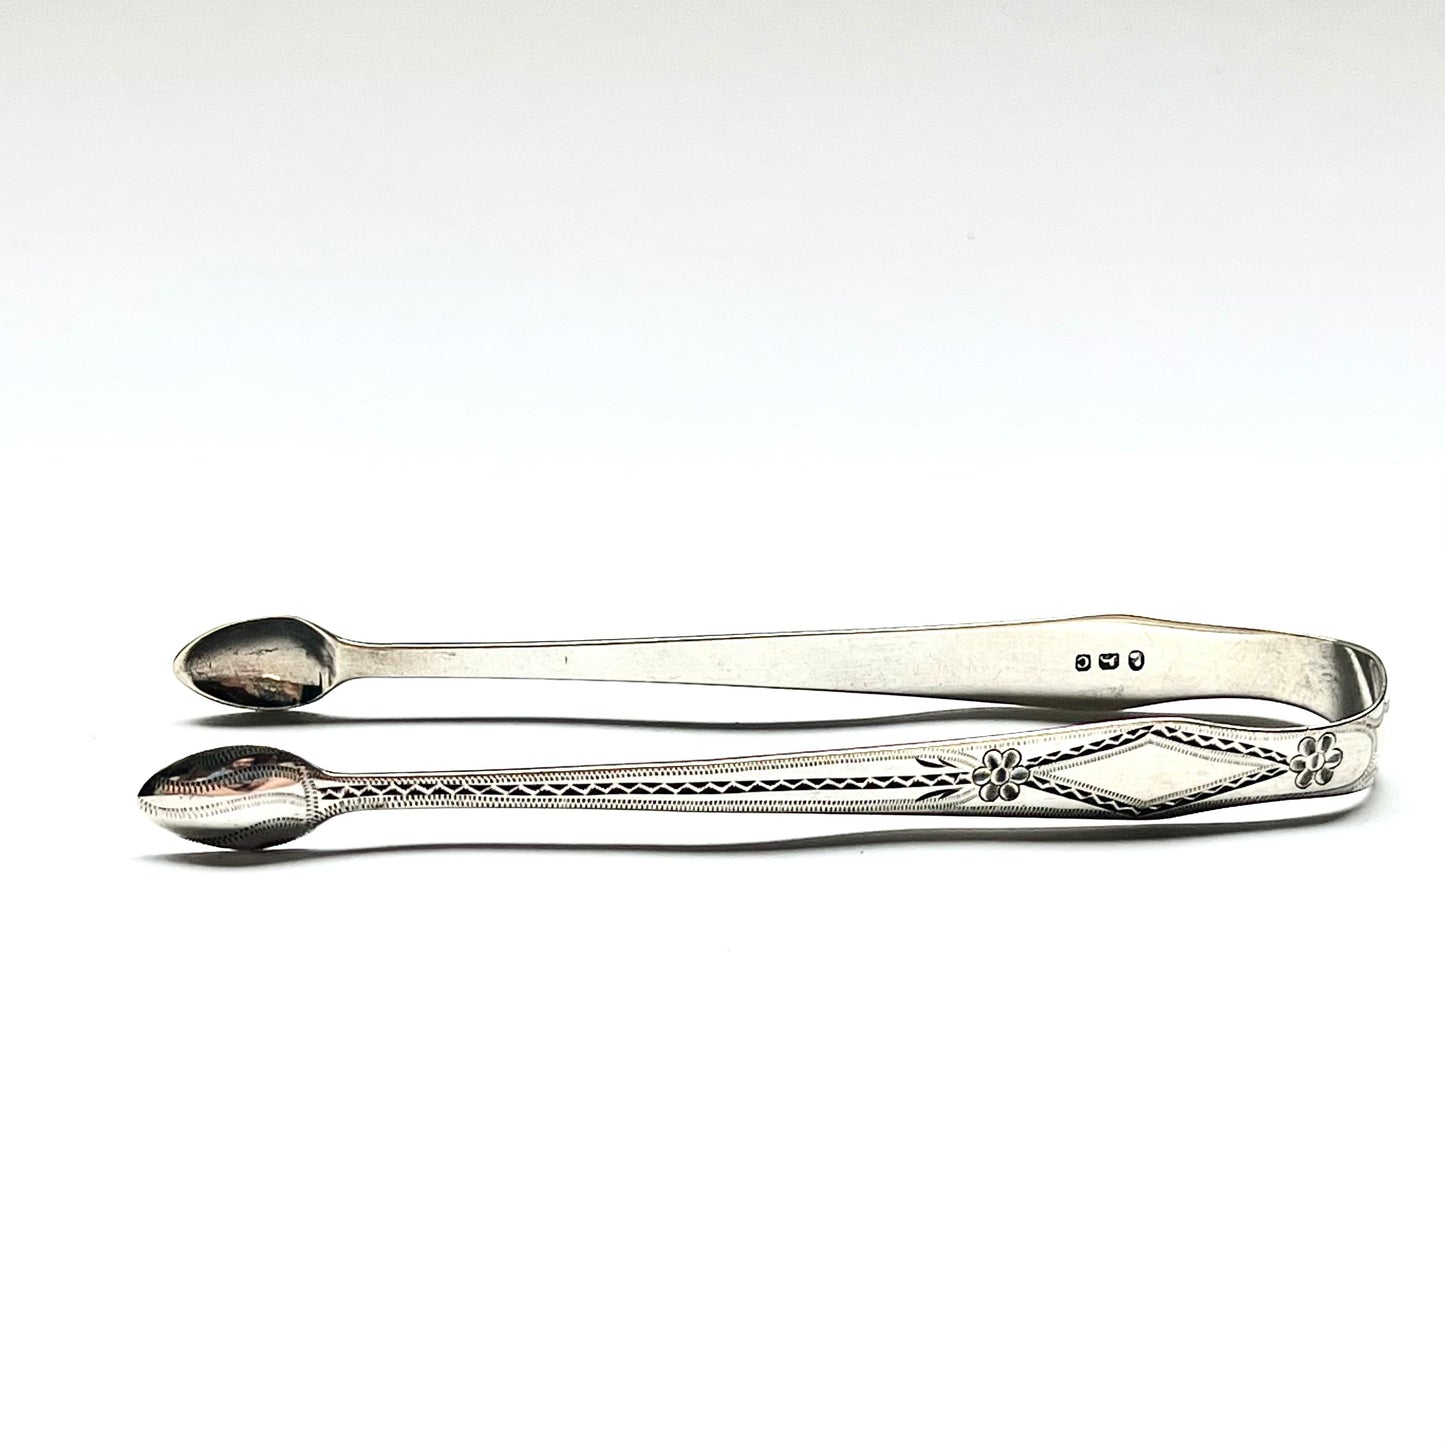 Antique Georgian bright cut pattern sterling silver tongs, London, 1798, George Smith II &amp; Thomas Hoyter